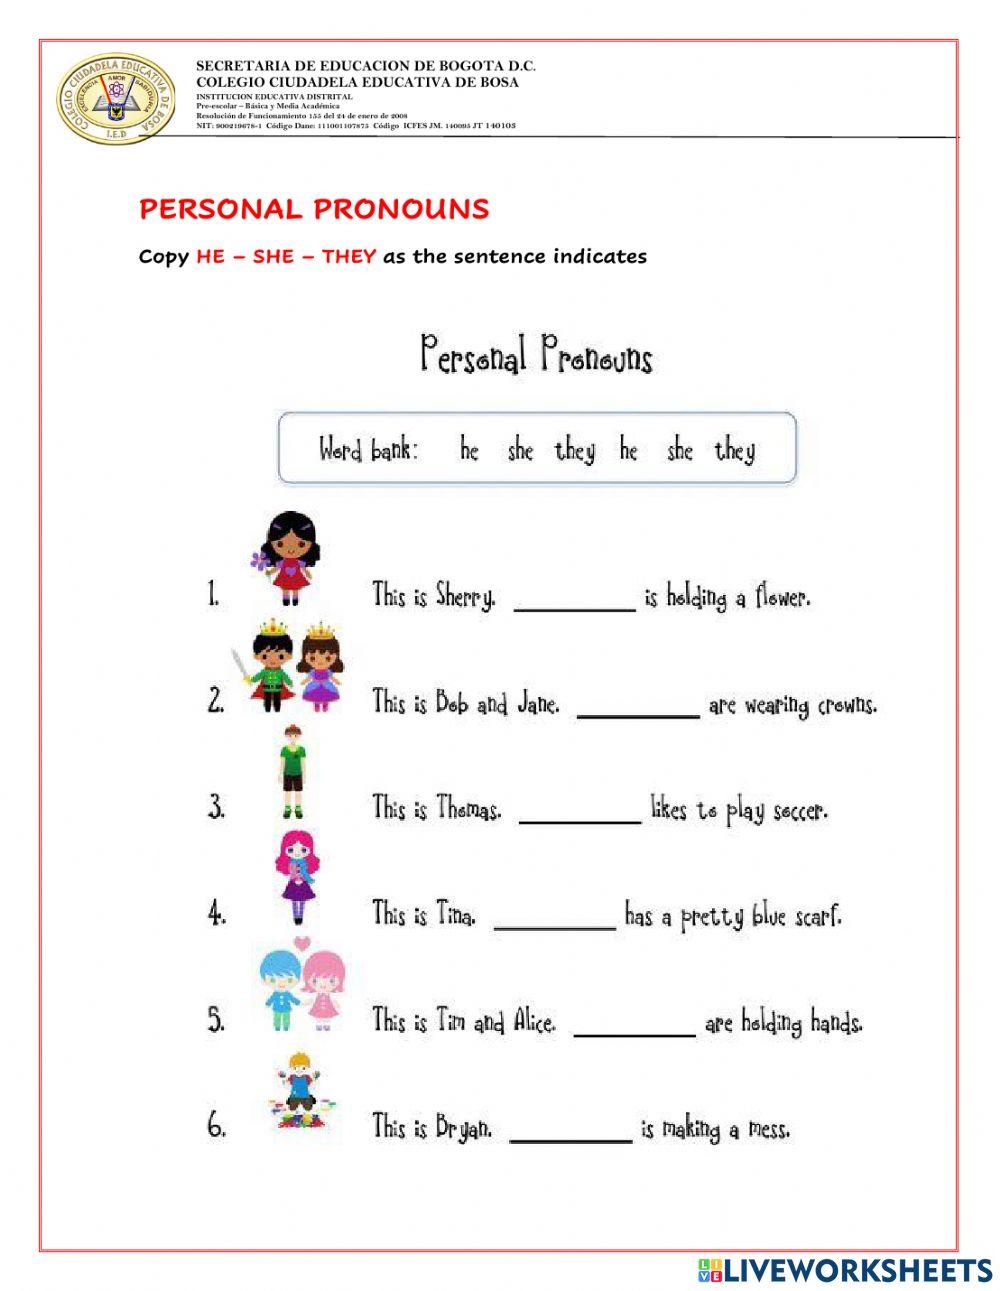 Articles, personal pronouns, demonstrative adjectives